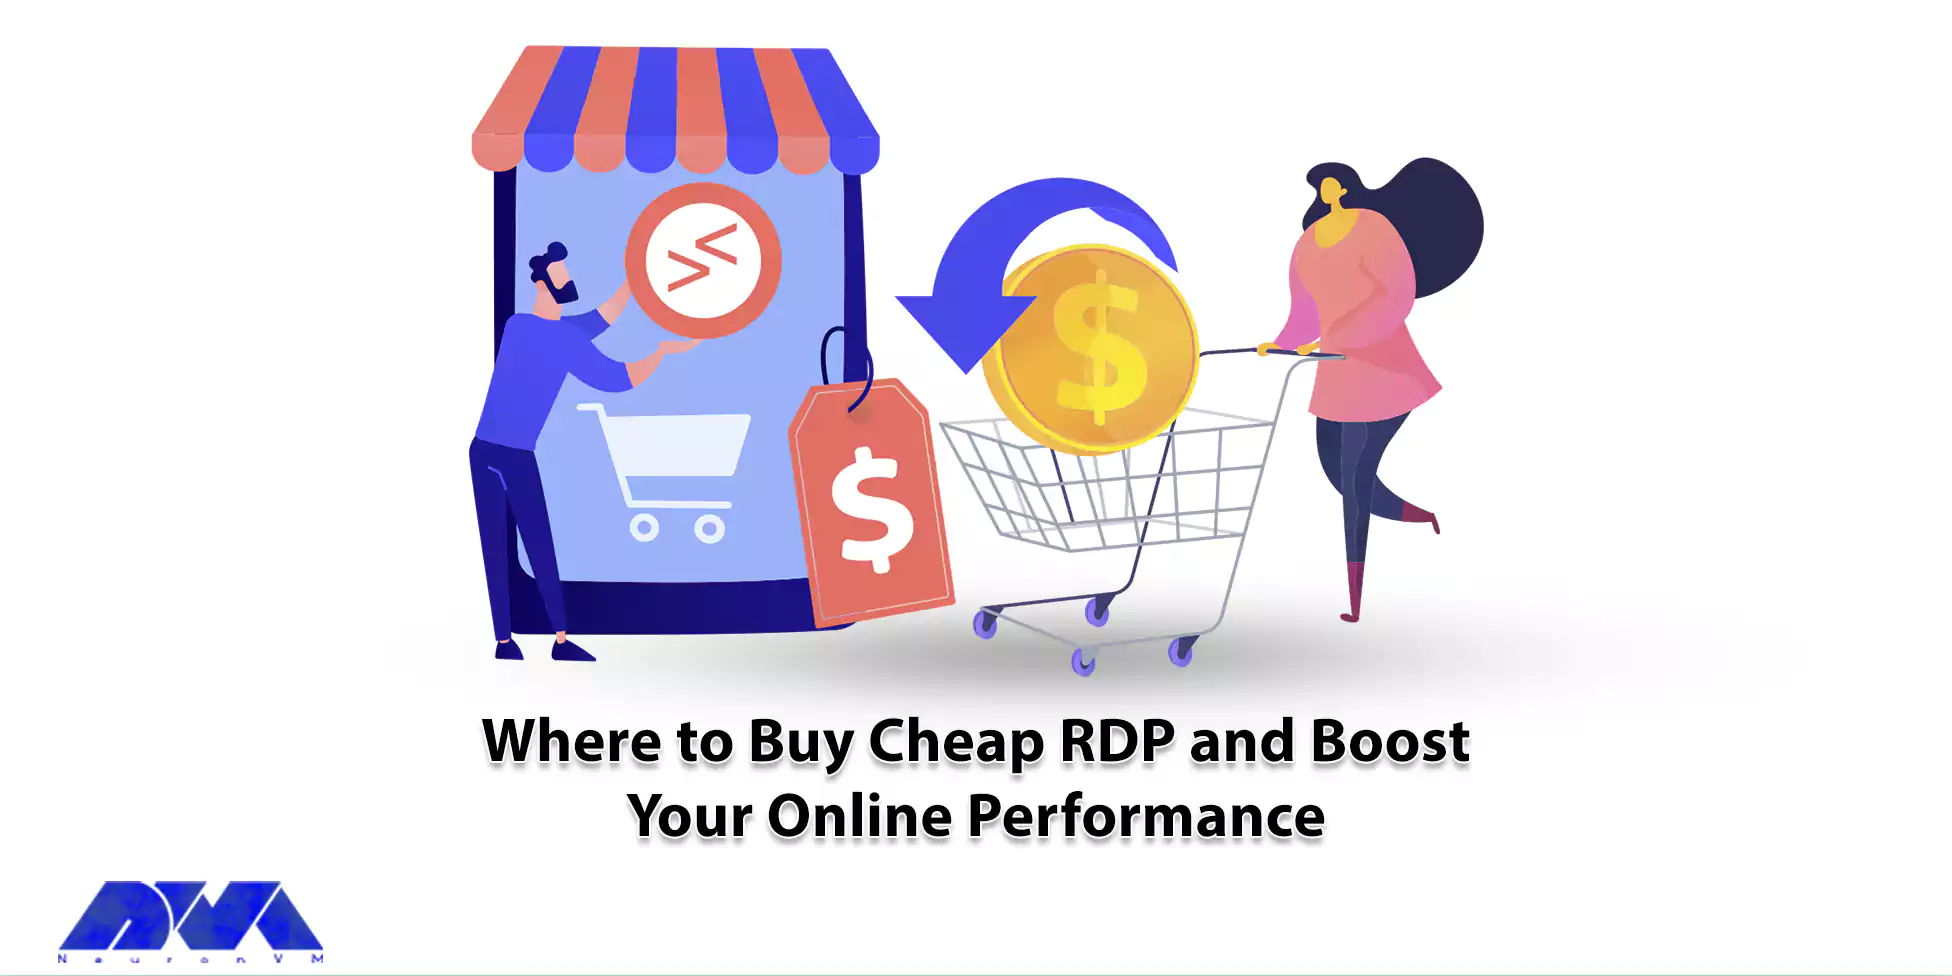 Where to Buy Cheap RDP and Boost Your Online Performance